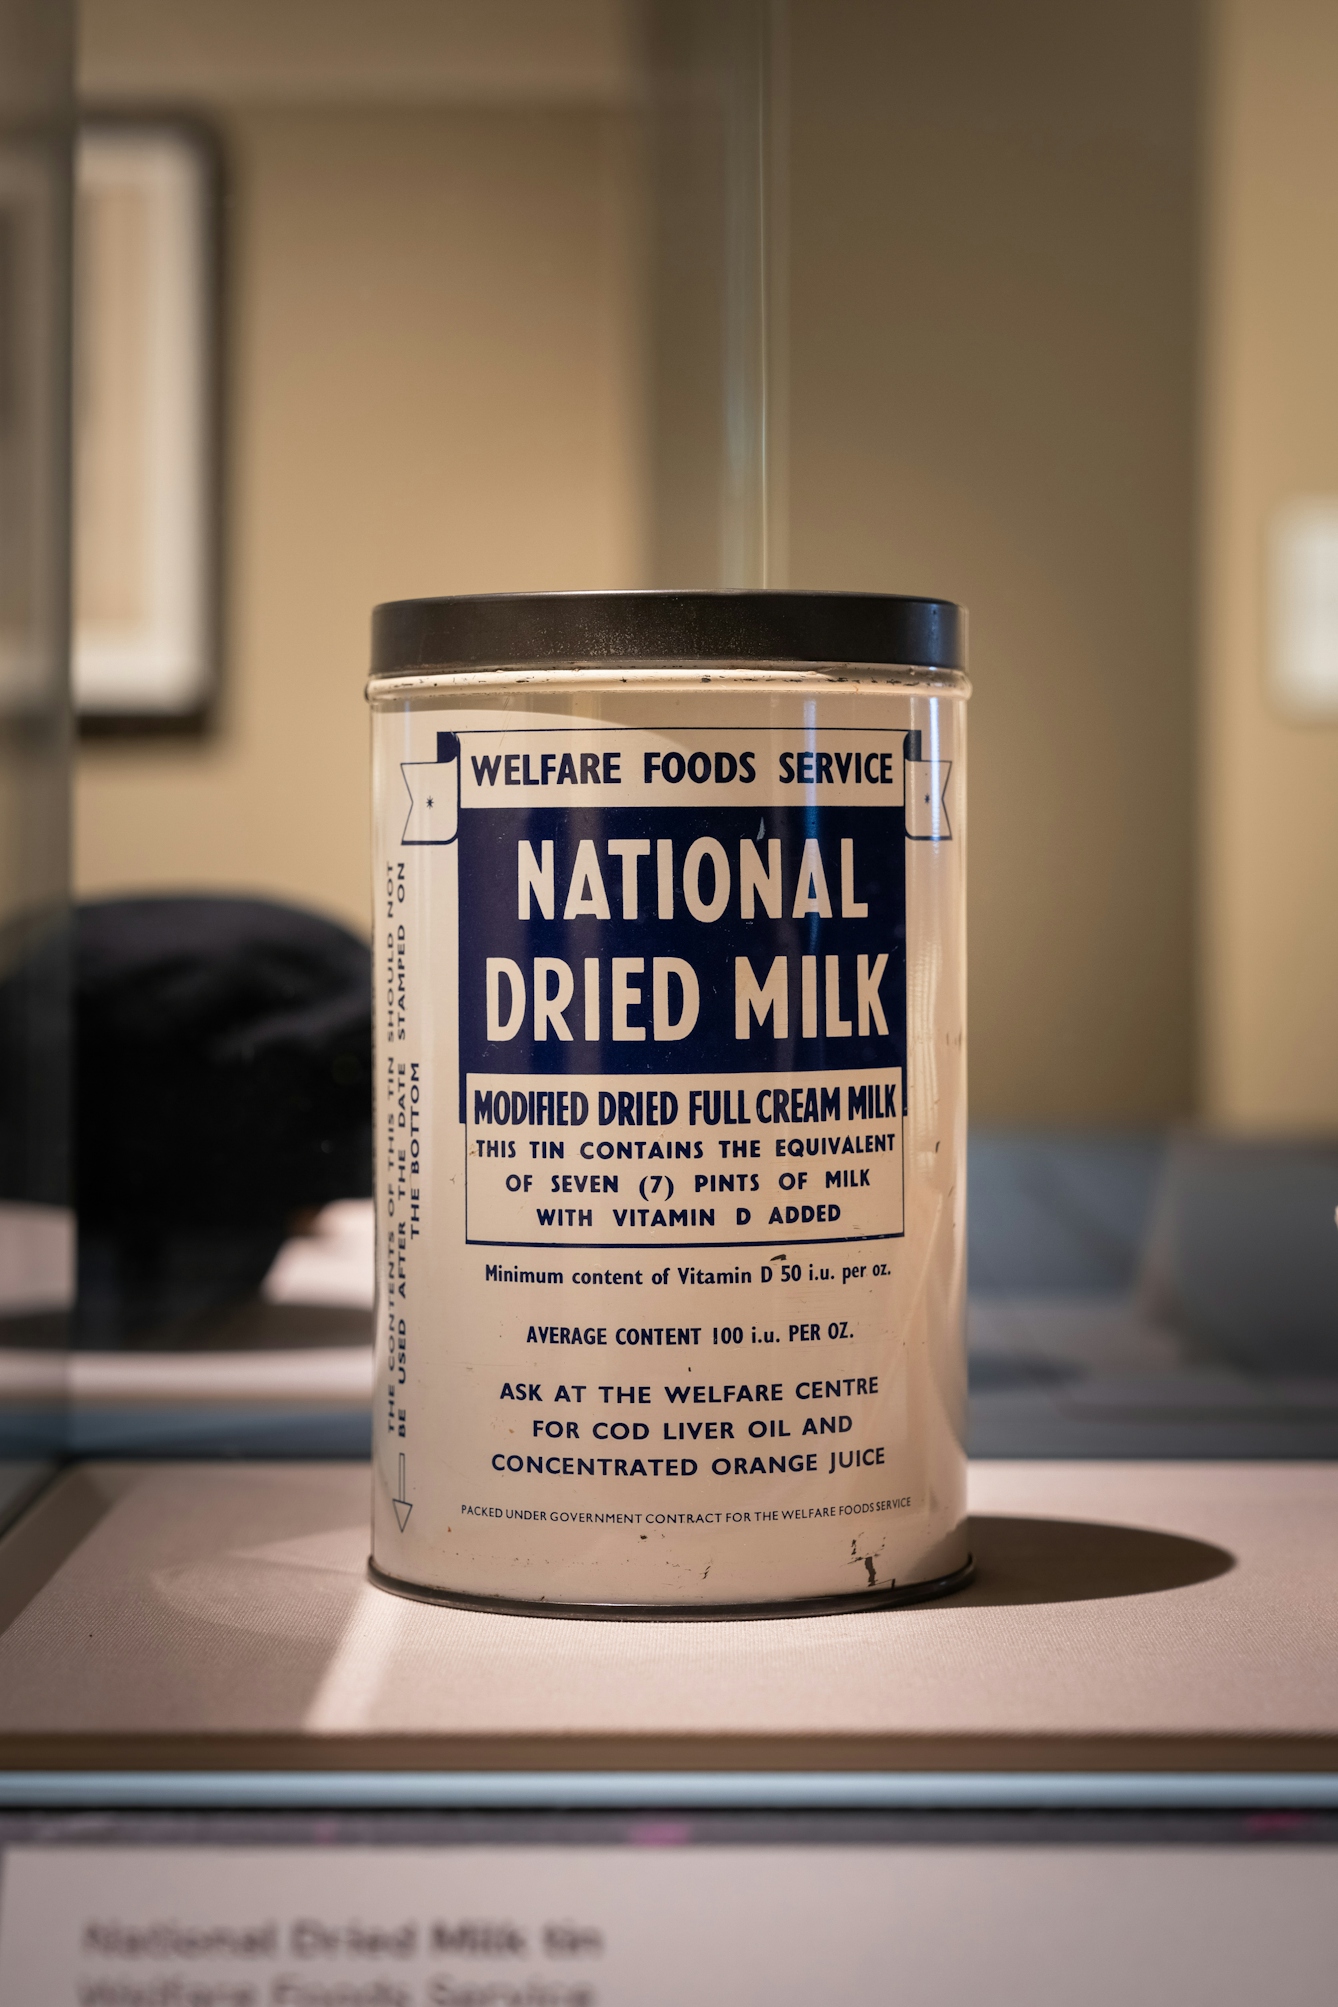 Photograph of a tin of dried milk from the 1950s, with the brand name, 'Welfare Foods Service, National Dried milk'. The tin is displayed in a perspex display case.